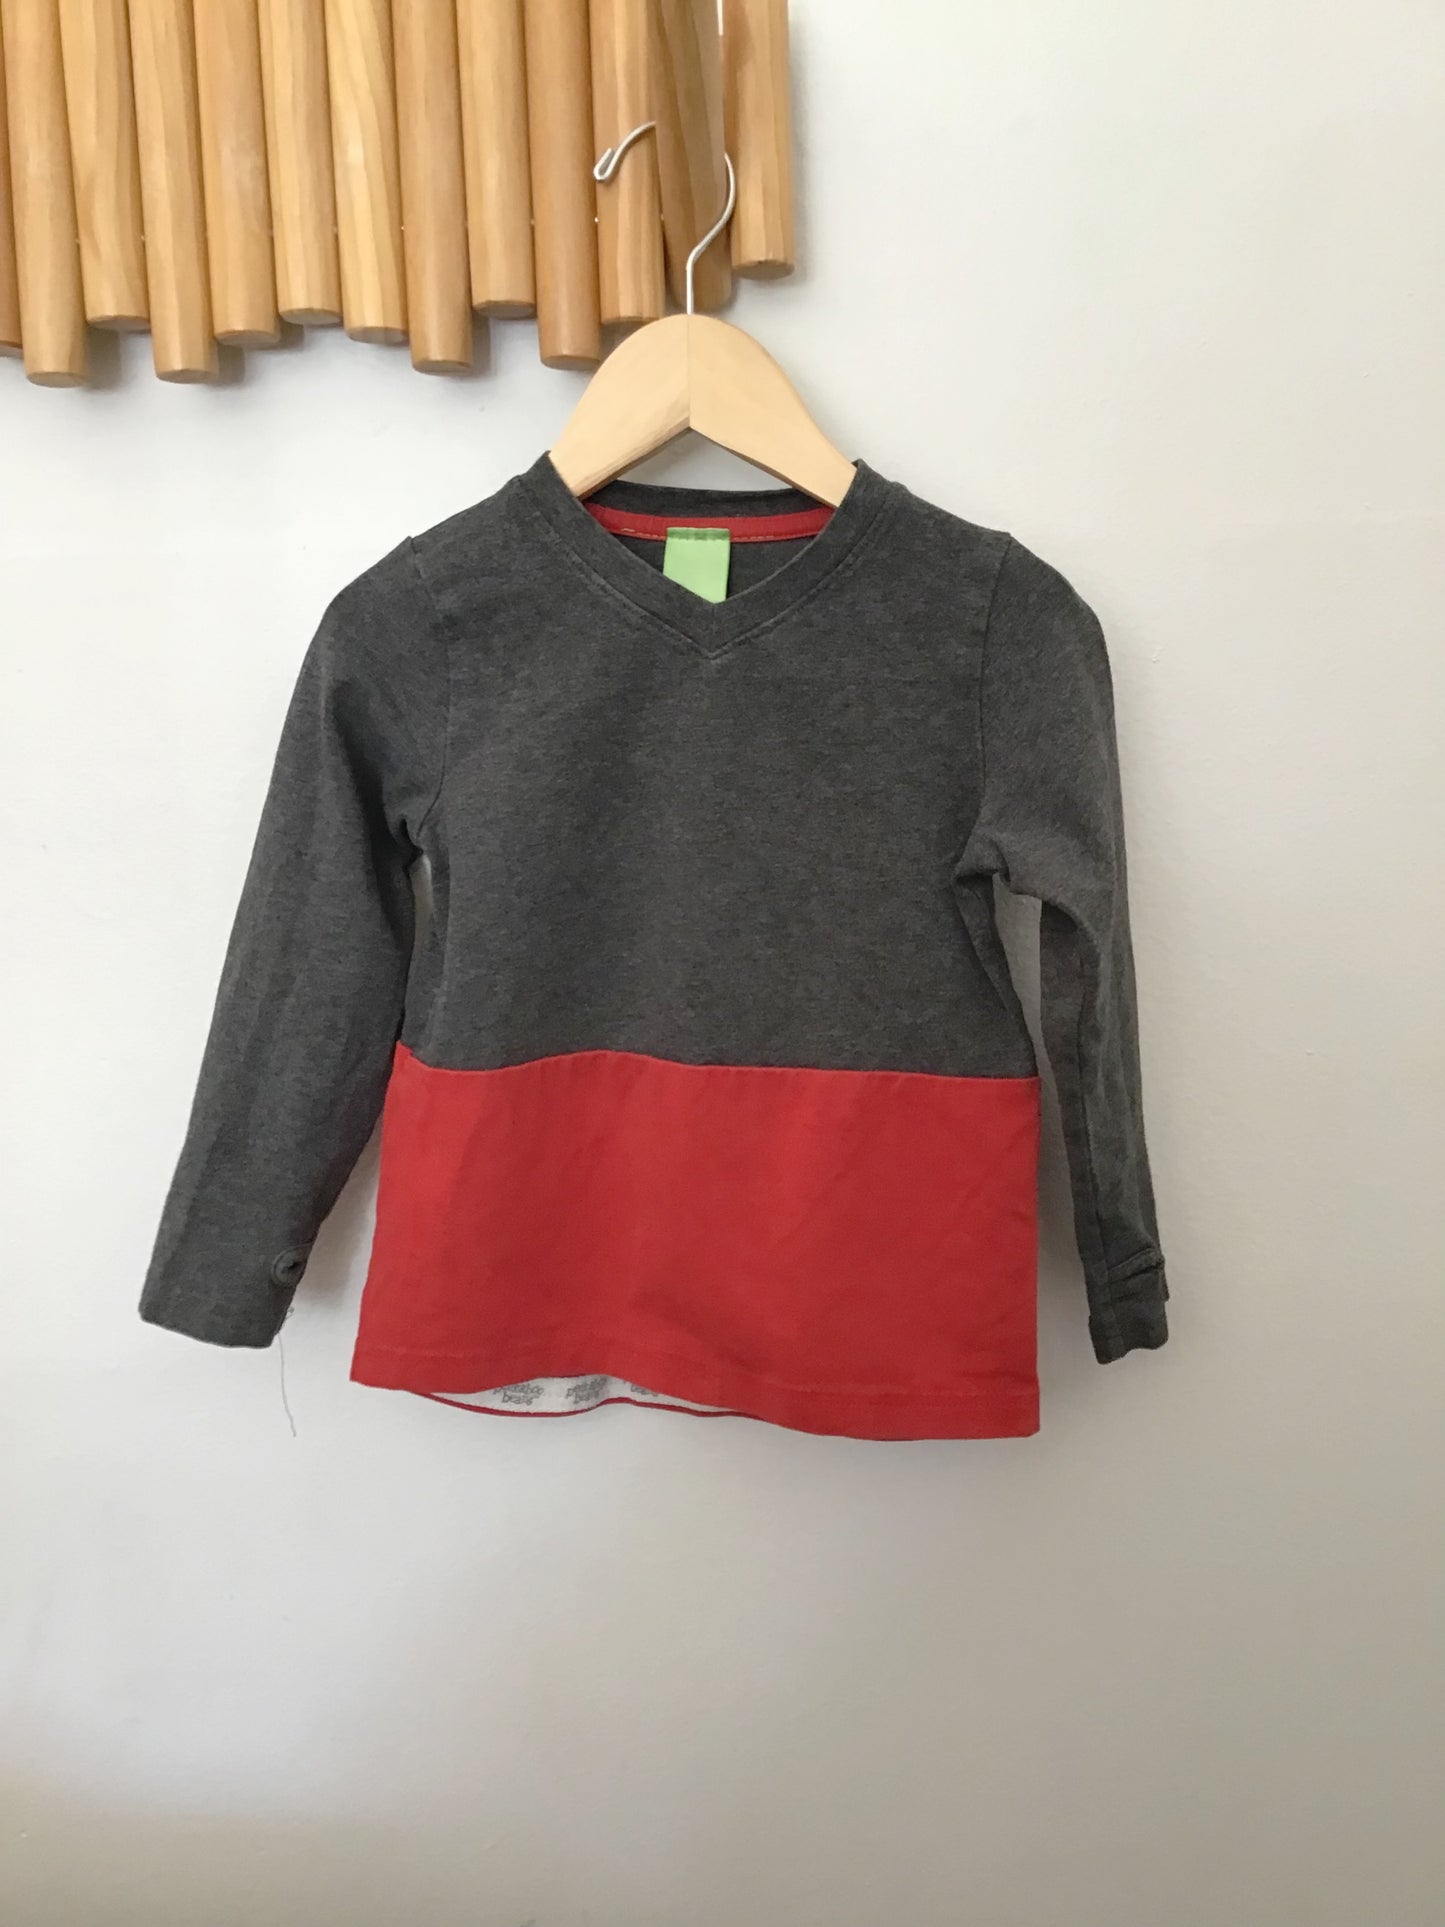 PK Beans red and grey thick tee 2y